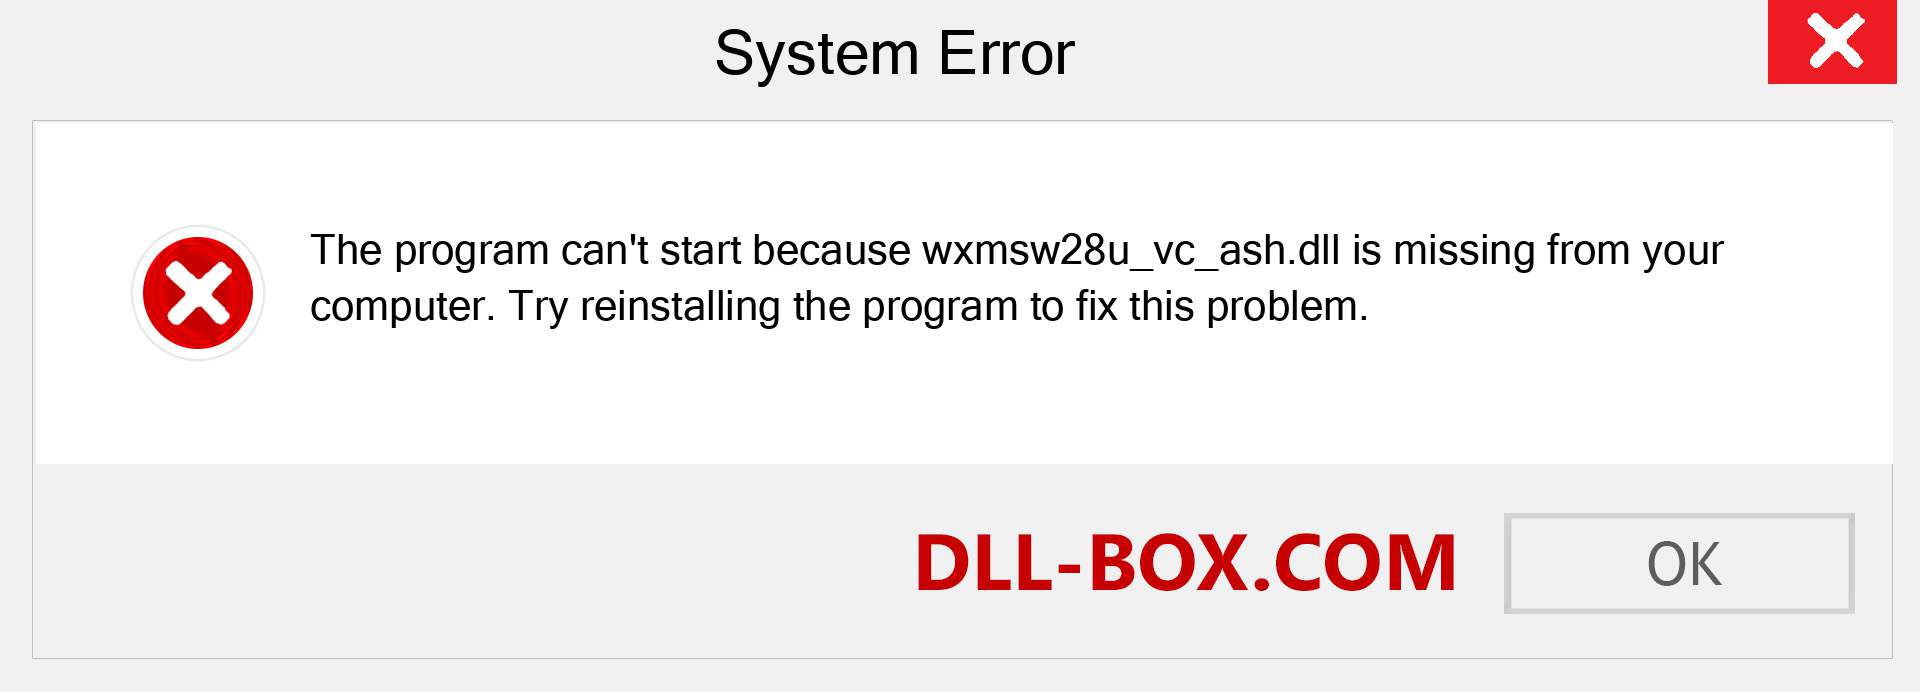  wxmsw28u_vc_ash.dll file is missing?. Download for Windows 7, 8, 10 - Fix  wxmsw28u_vc_ash dll Missing Error on Windows, photos, images